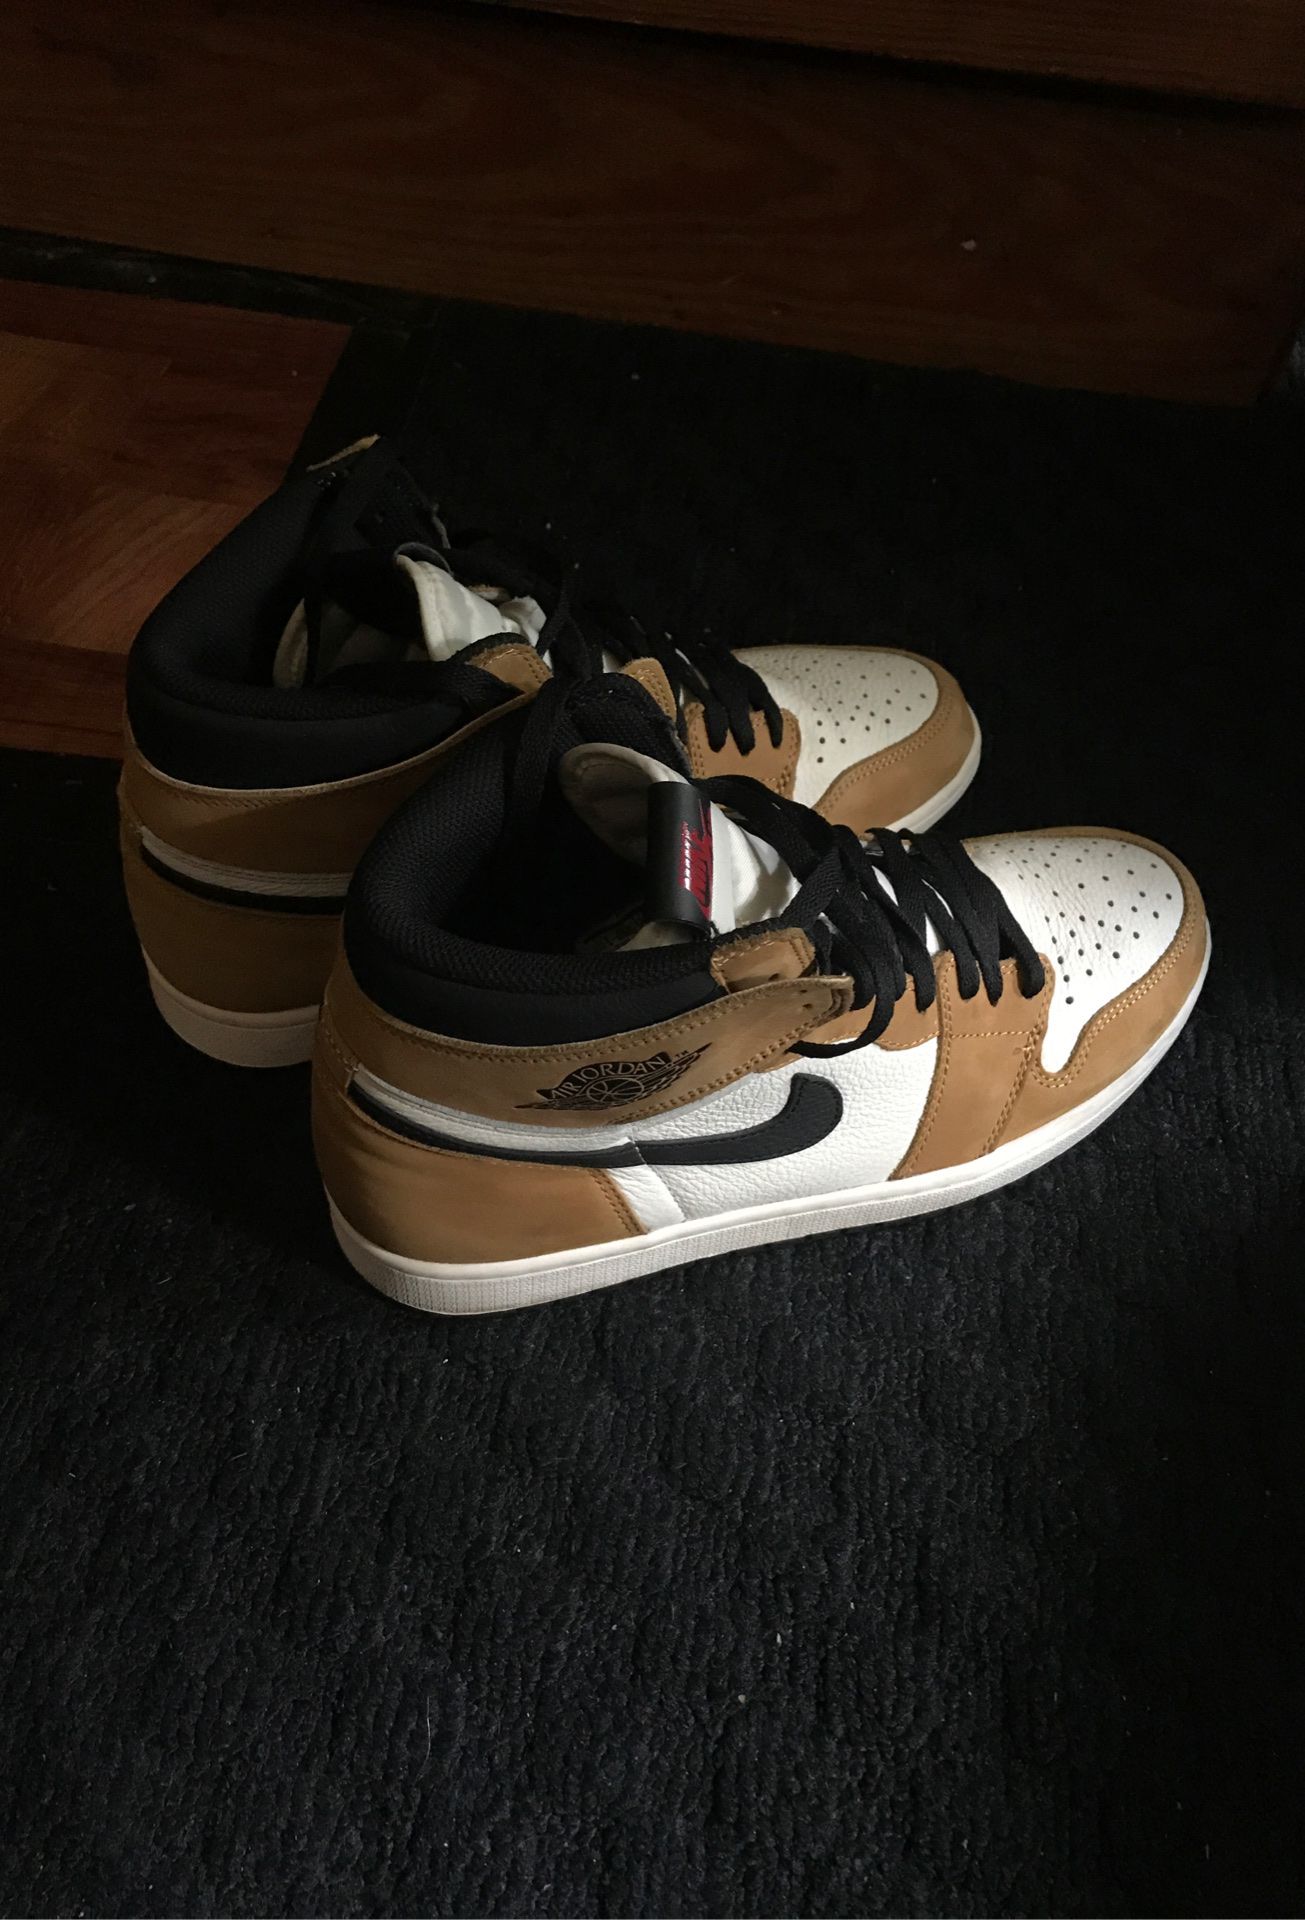 Jordan 1 retro high “Rookie of the Year” for Sale in Salem, OH - OfferUp